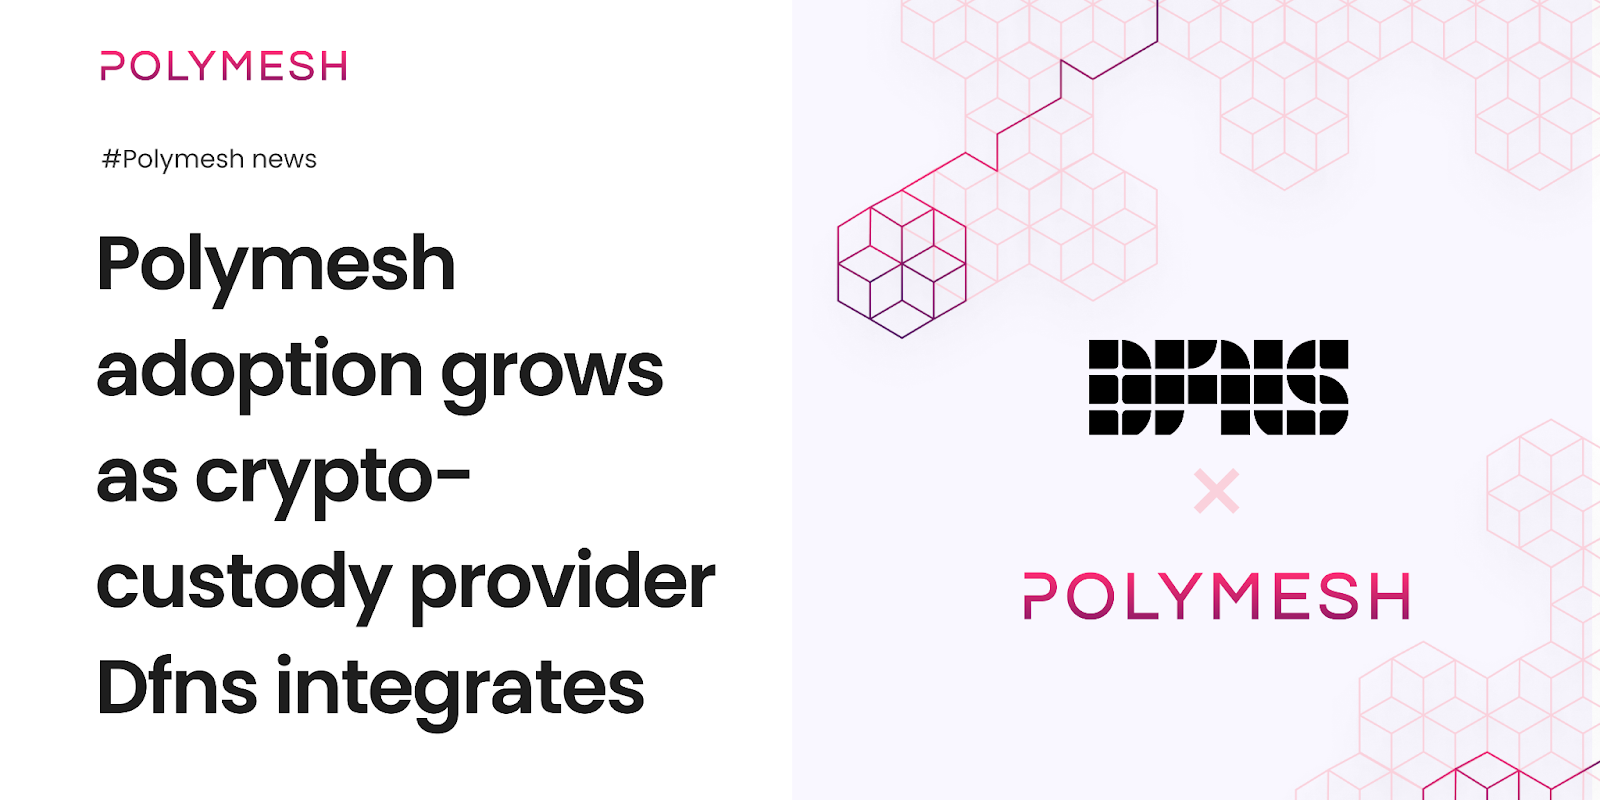 POLY Price Prediction 2022-2031: Is Polymath a Good Investment? 11